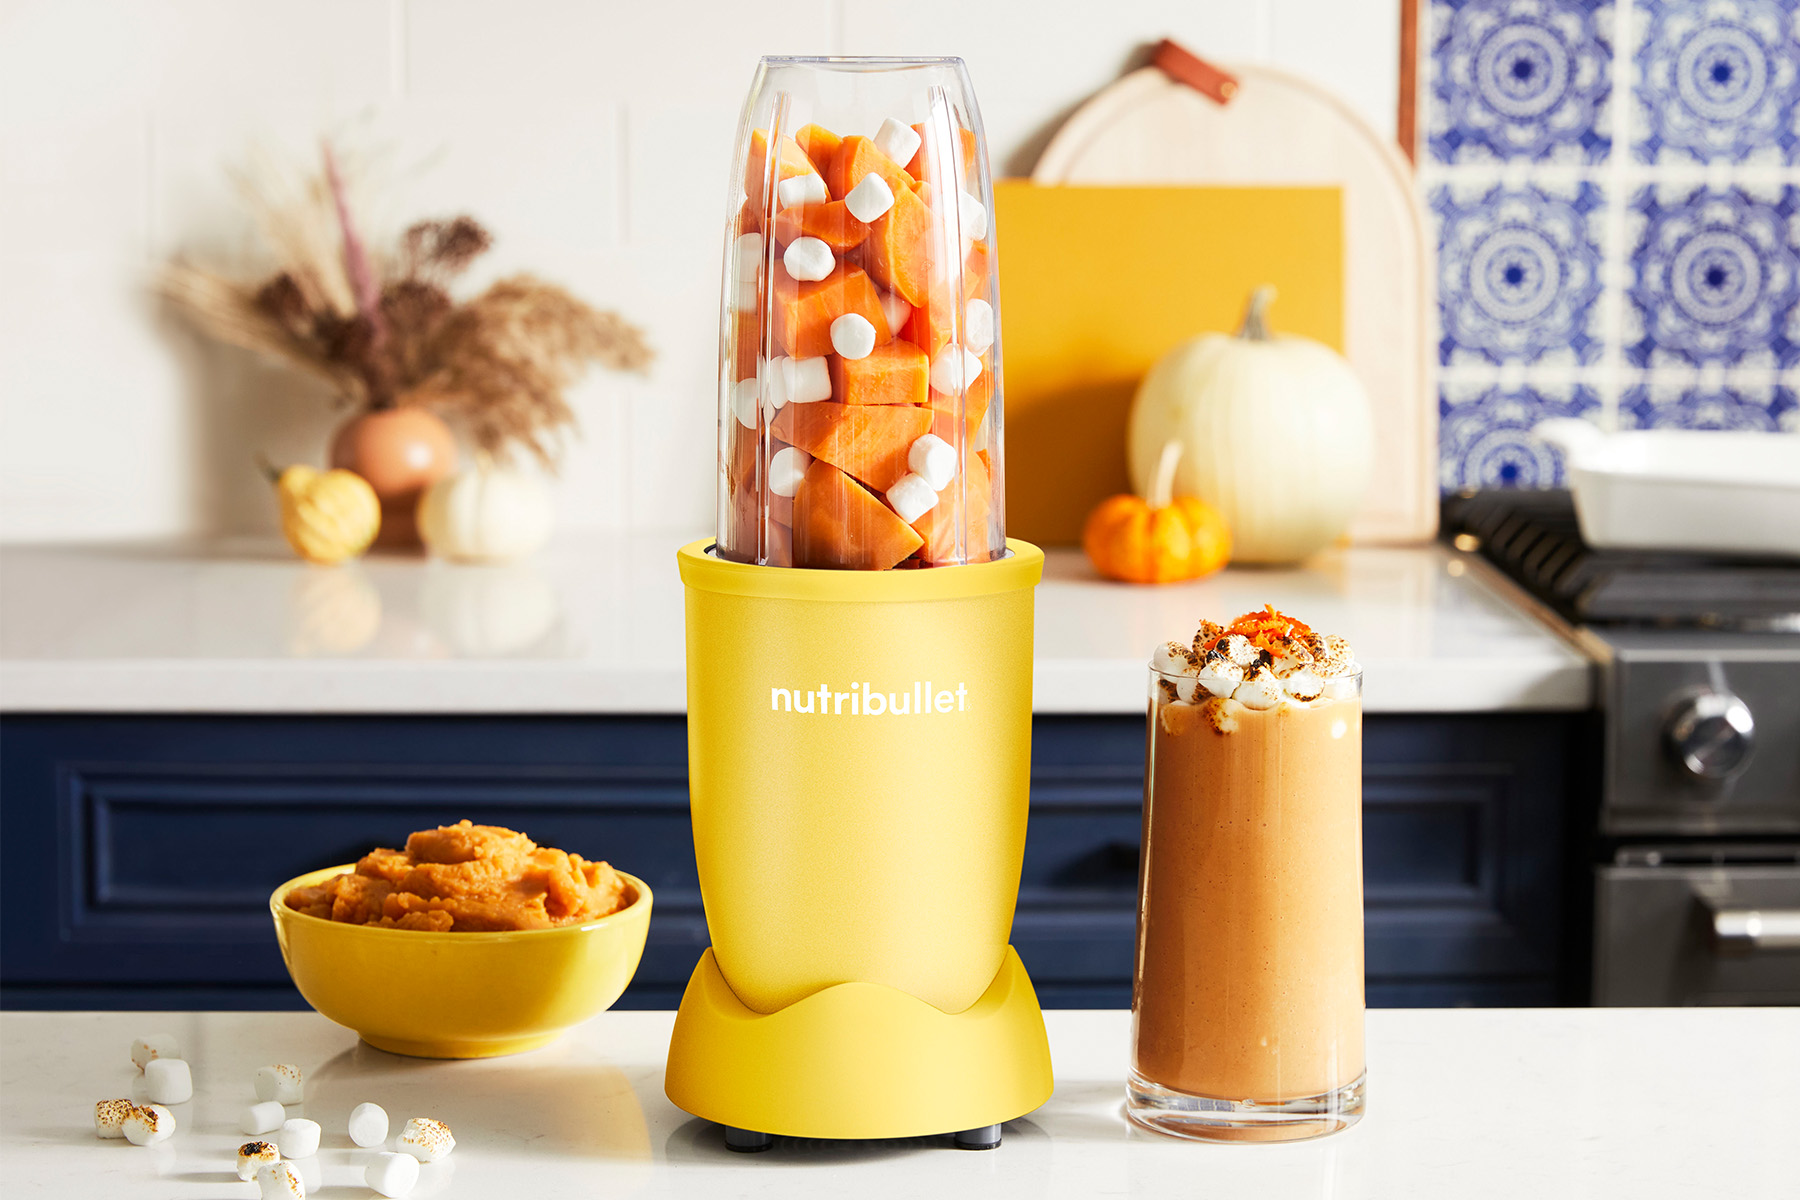 blended sweet potato smoothie with marshmallows next to a yellow nutribullet blender and a bowl of pureed sweet potatoes on a kitchen counter